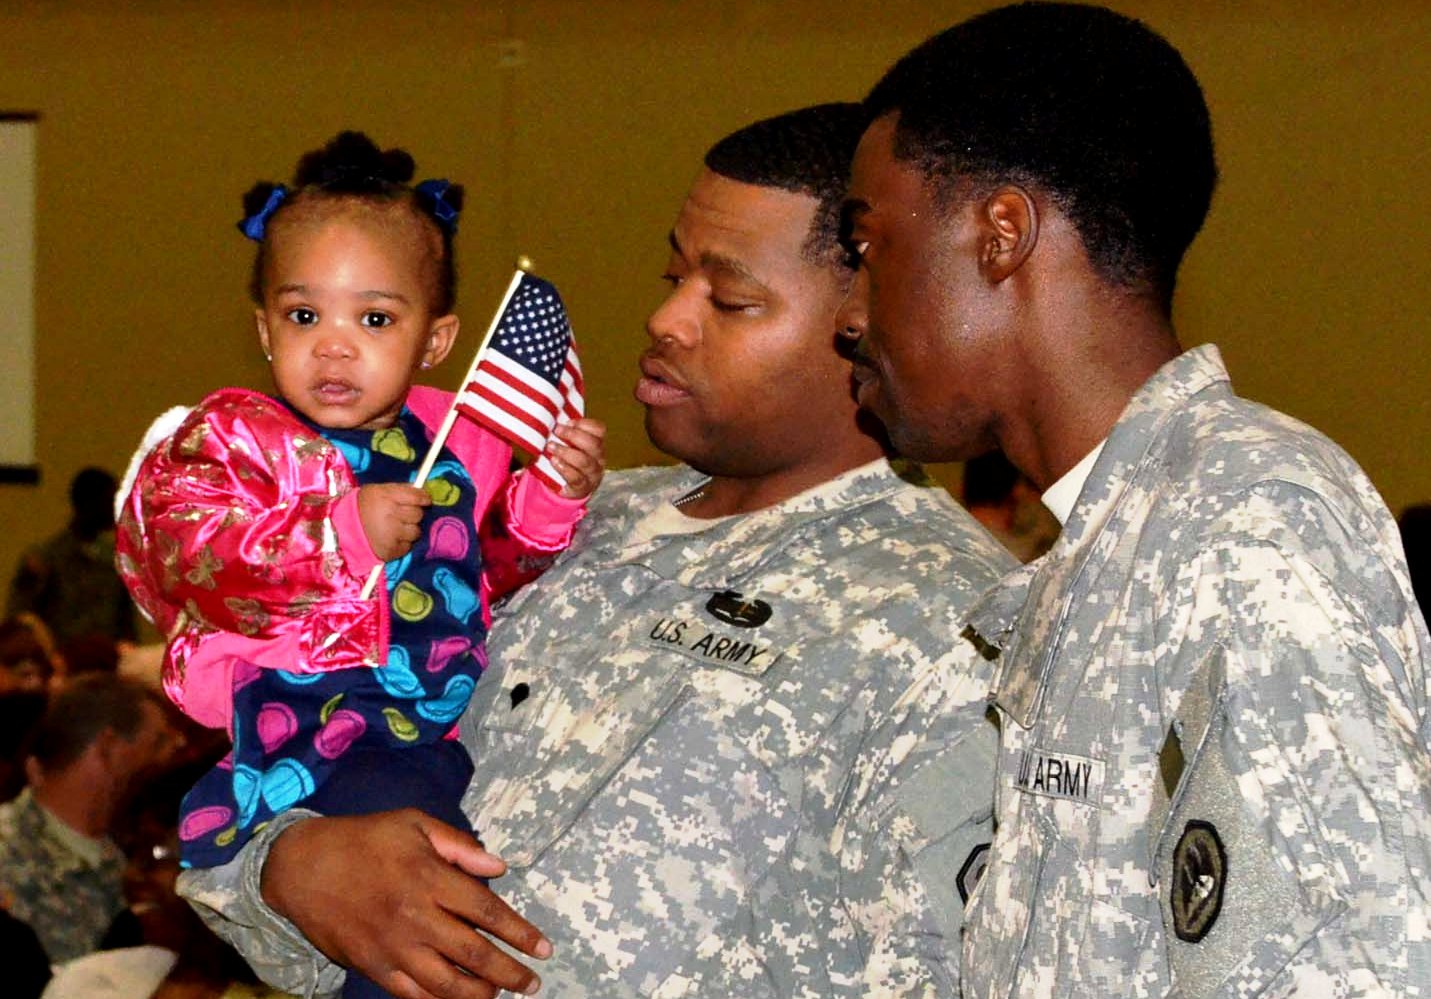 LAPLACE, La. – Soldiers of the Louisiana National Guard’s 1084th Transportation Company bid farewell to family and friends during a deployment ceremony at The St. John Center in LaPlace, La., Feb. 24, 2013. The 1084th will deploy more than 155 Soldiers during a 365-day deployment to Afghanistan to utilize their expertise and versatility by providing convoy escort of host-nation vehicles and provide transportation support to friendly forces operating within the assigned area. (National Guard photo by Sgt. Rashawn D. Price, 241st Mobile Public Affairs Detachment)